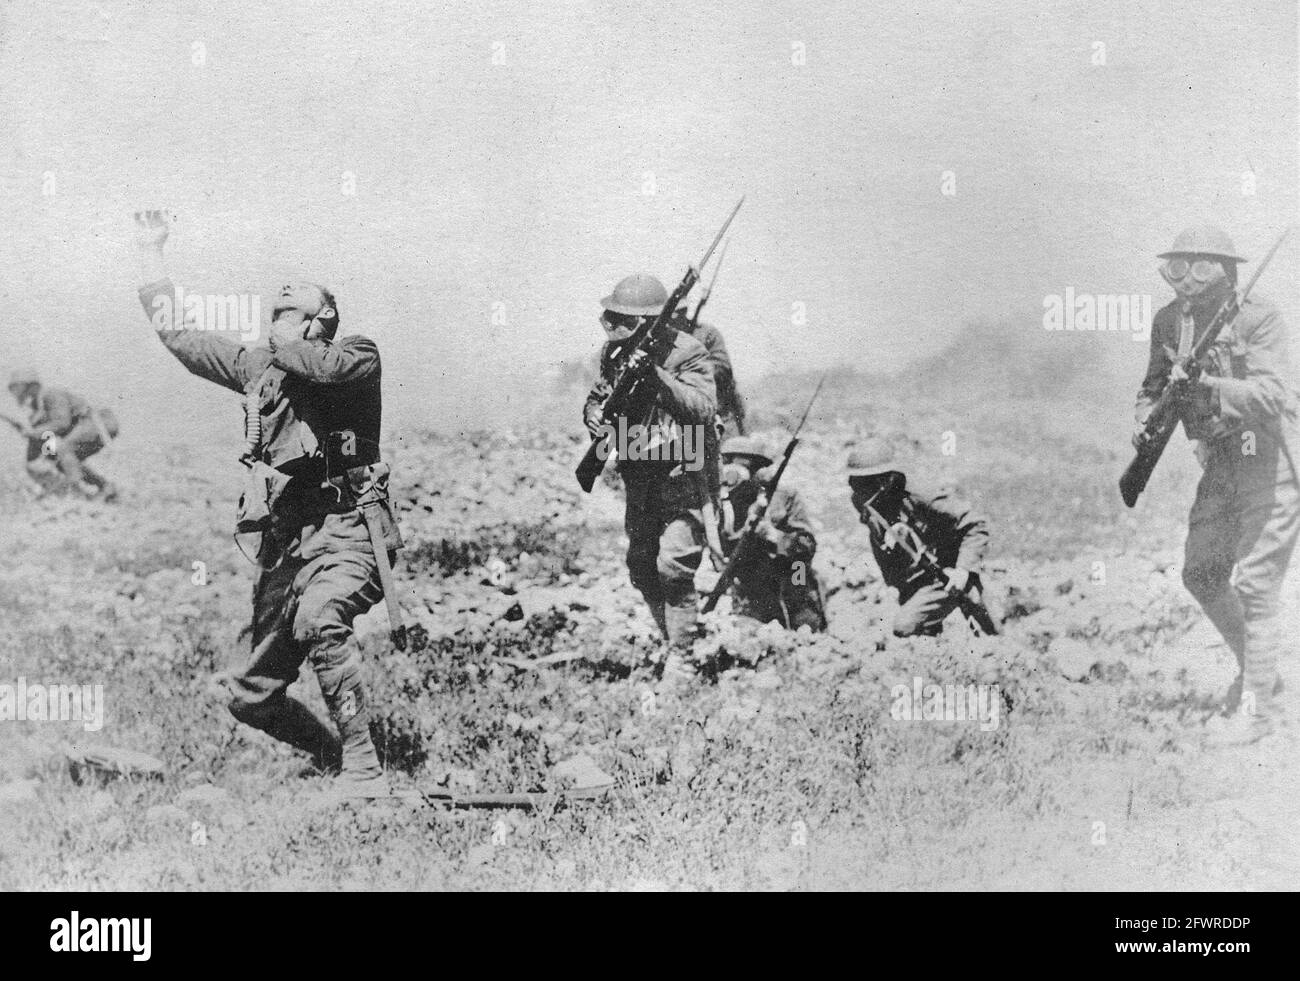 The effect of phosgene gas. American infantrymen wearing gas masks while advancing. The soldier in the foreground is suffering the effects of gas, having not put on his mask. Phosgene was responsible for 85% of chemical-weapons fatalities during the Great War. Stock Photo